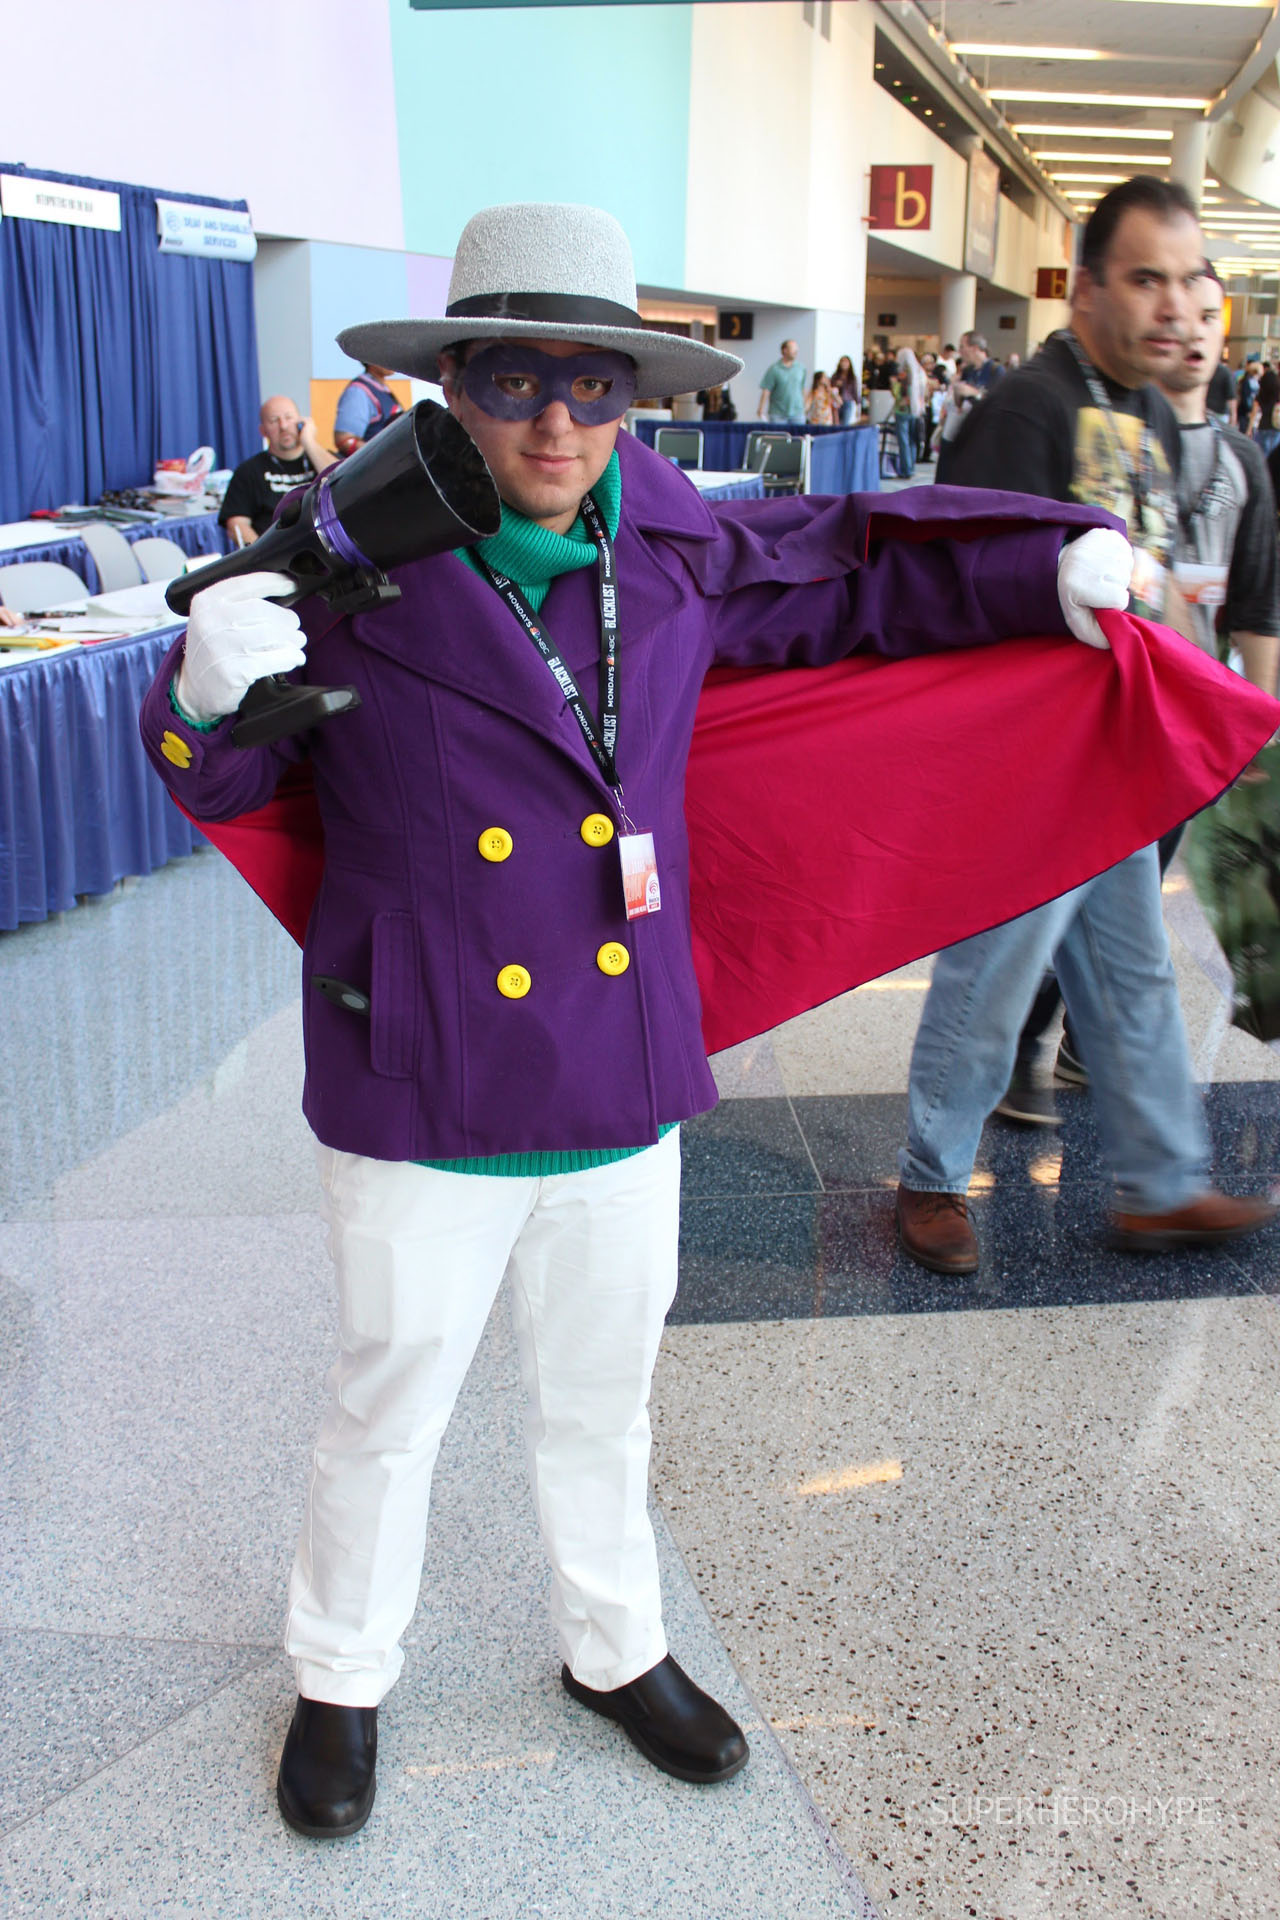 WonderCon: More Cosplay Photos From the Convention! - SuperHeroHype